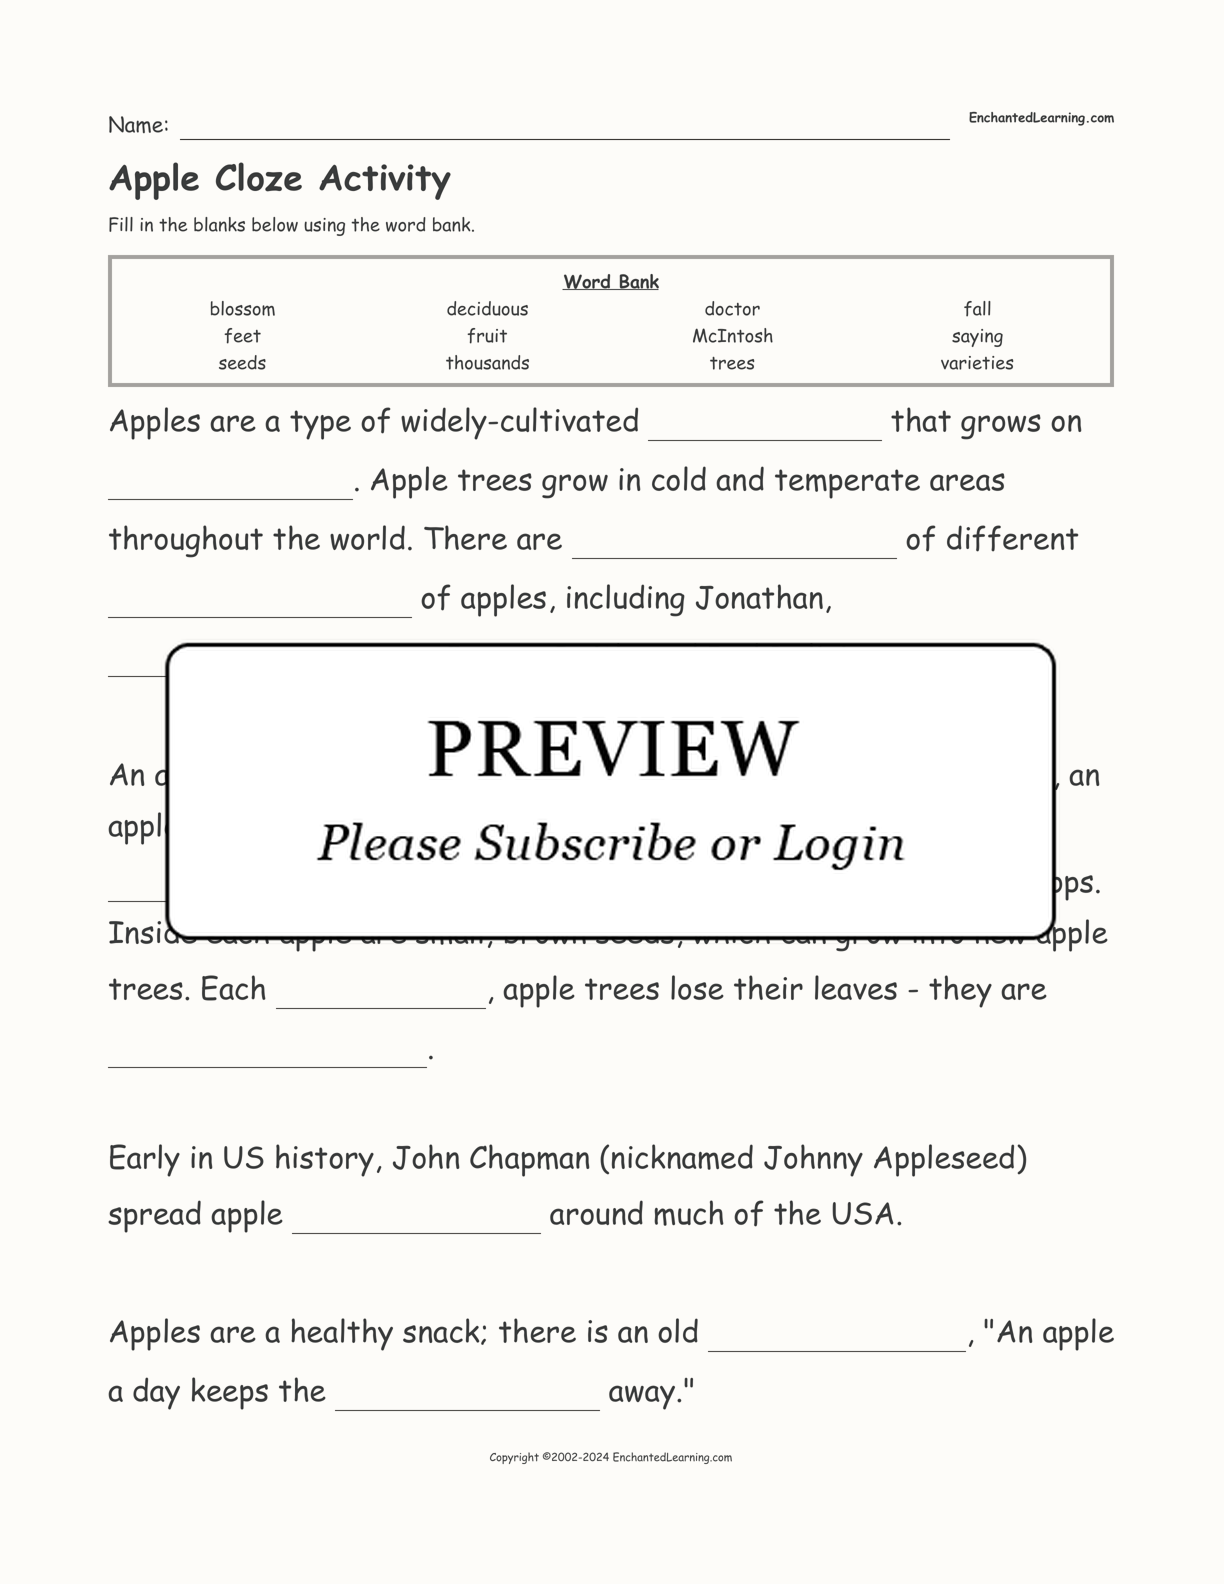 Apple Cloze Activity interactive worksheet page 1